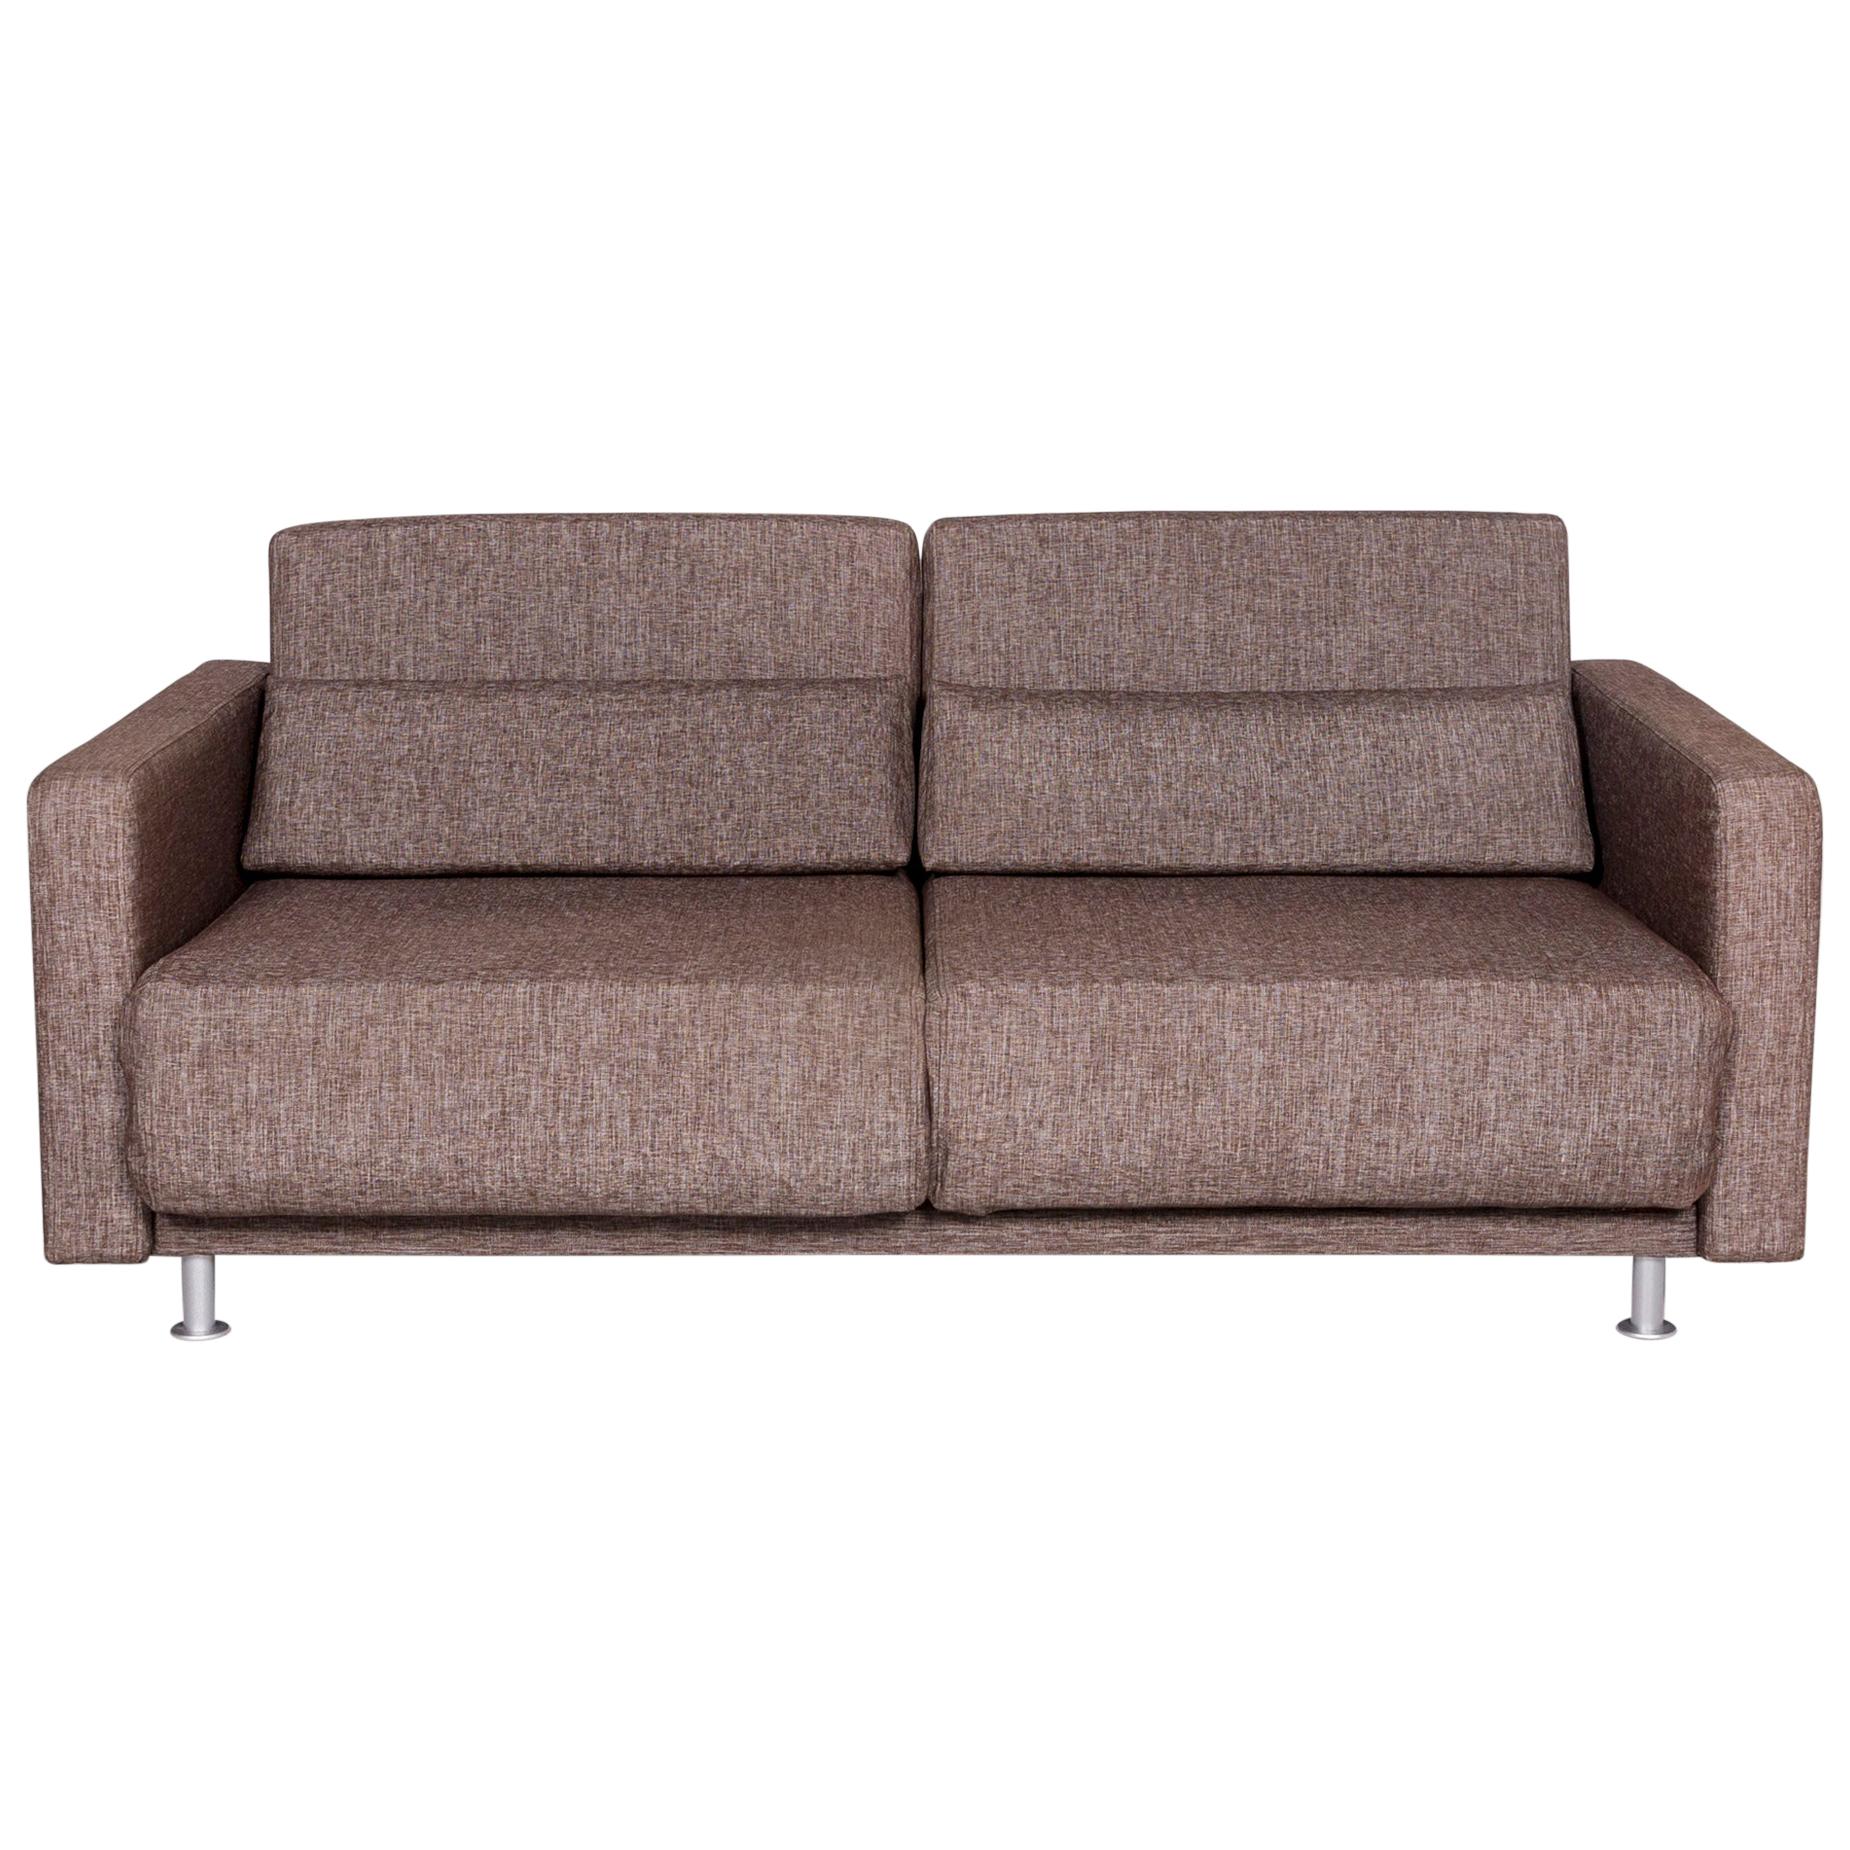 BoConcept Melo Fabric Sofa Bed Brown Sofa Sleep Function Function Couch